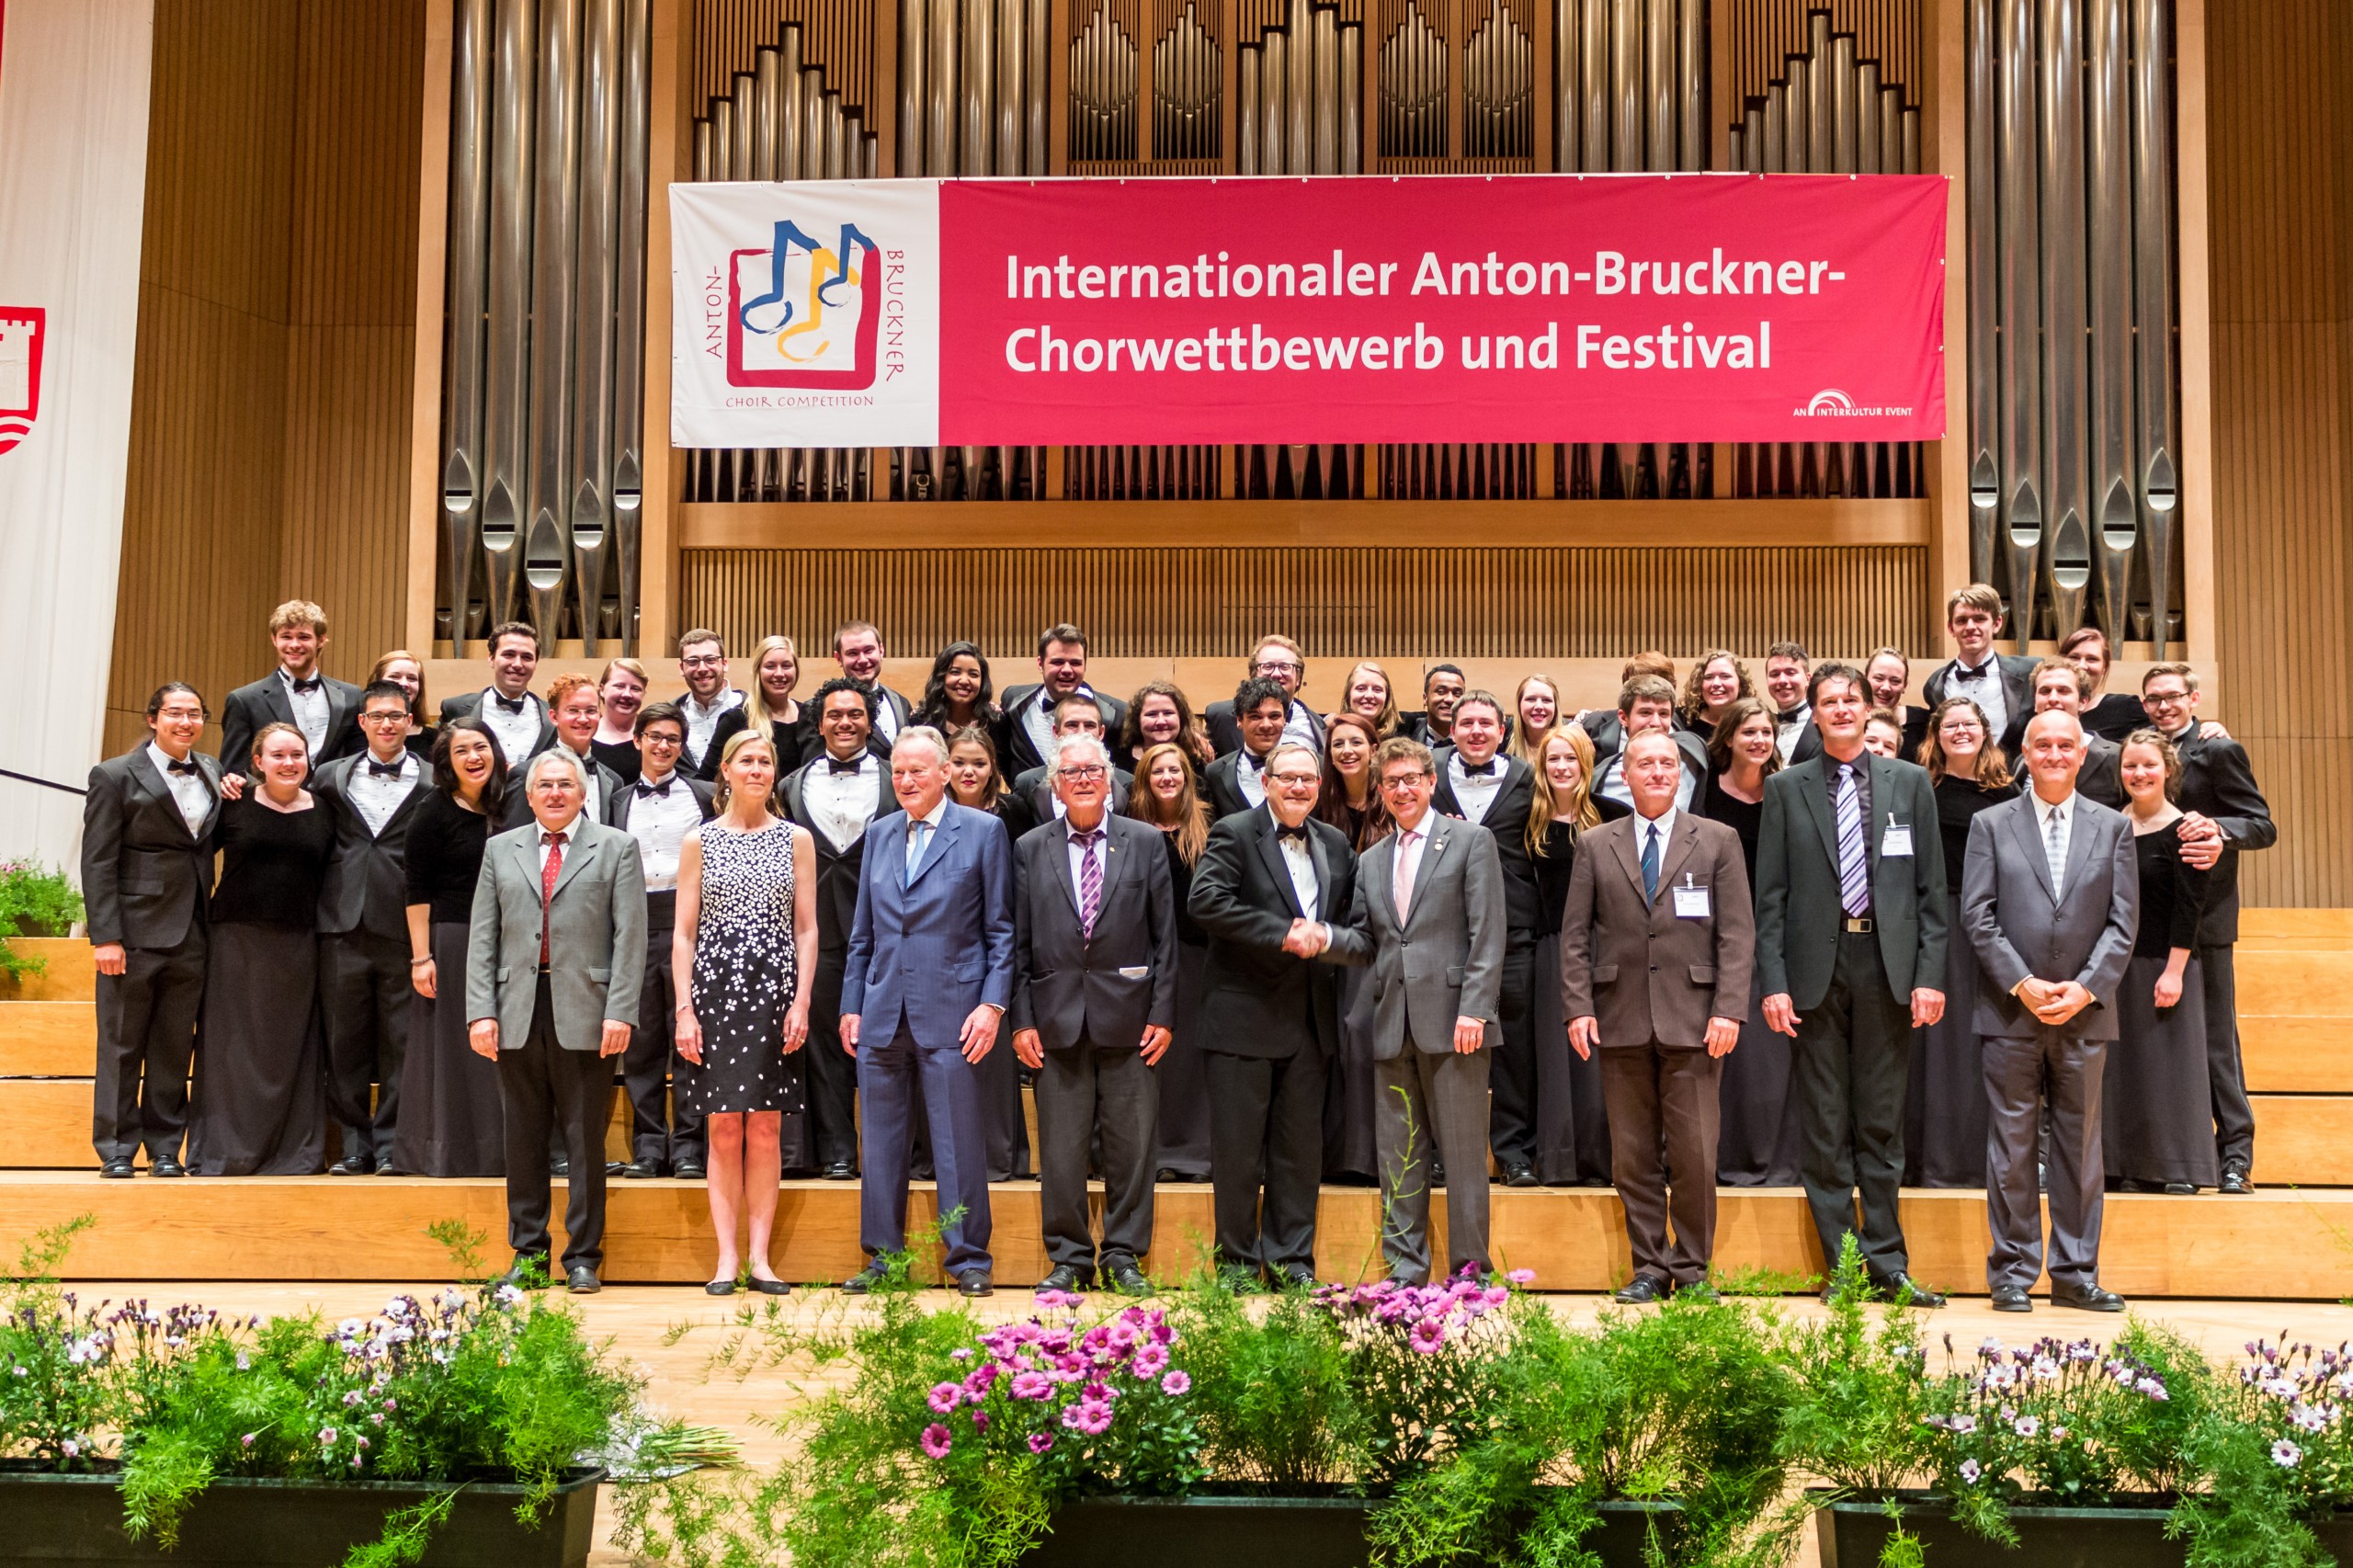 The Choir of the West with jury members after winning the Anton Bruckner Choir Grand Prize Award.